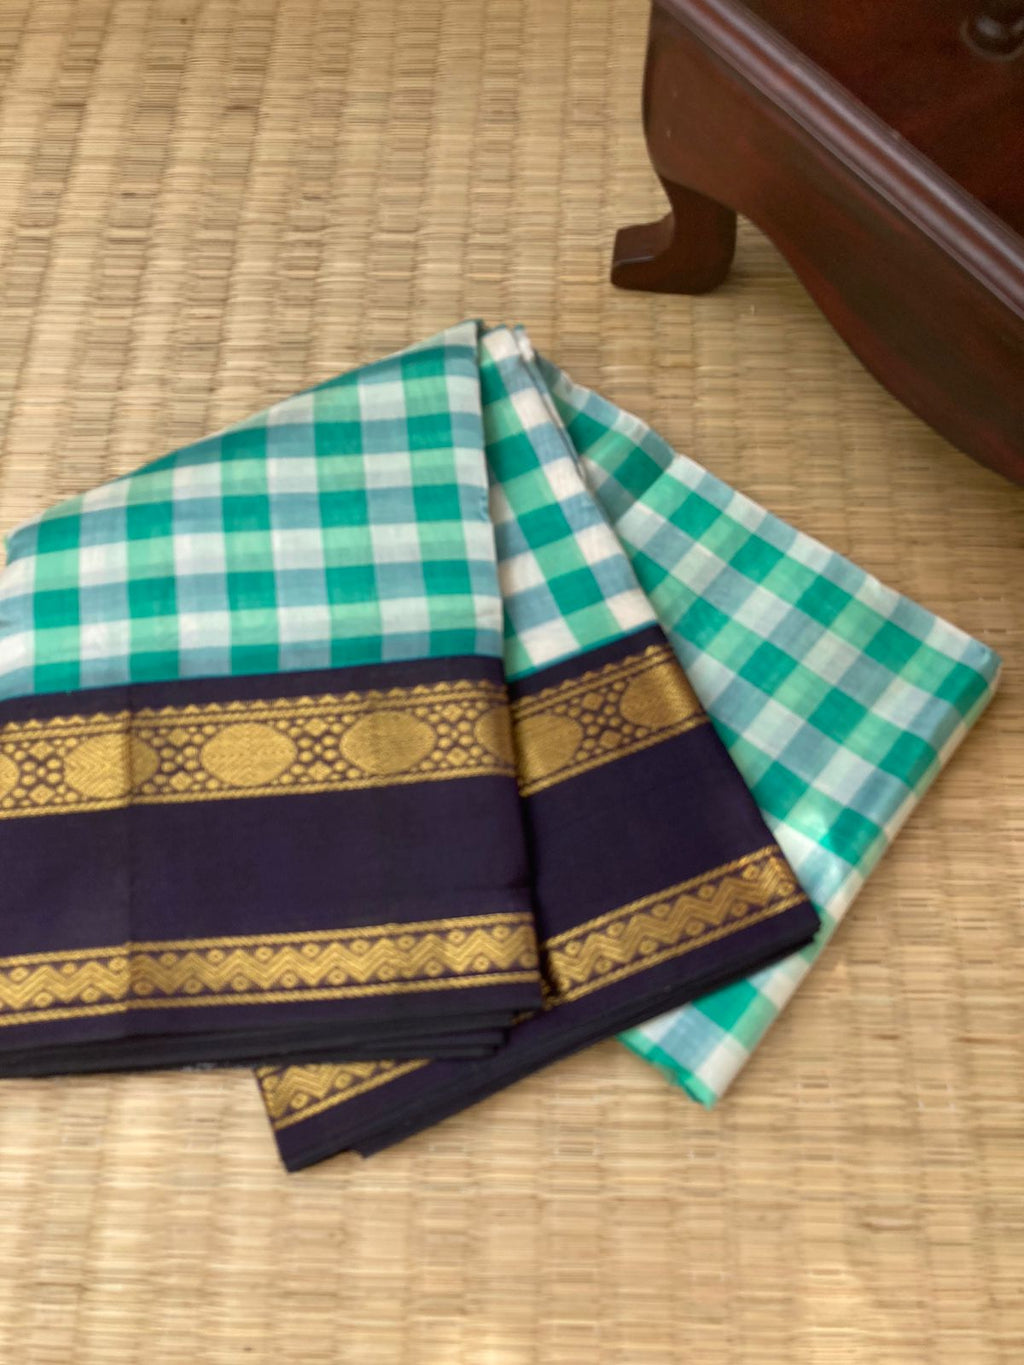 Paalum Palamum Kattams Korvai Silk Cottons - off white and rama blue chex with navy blue borders